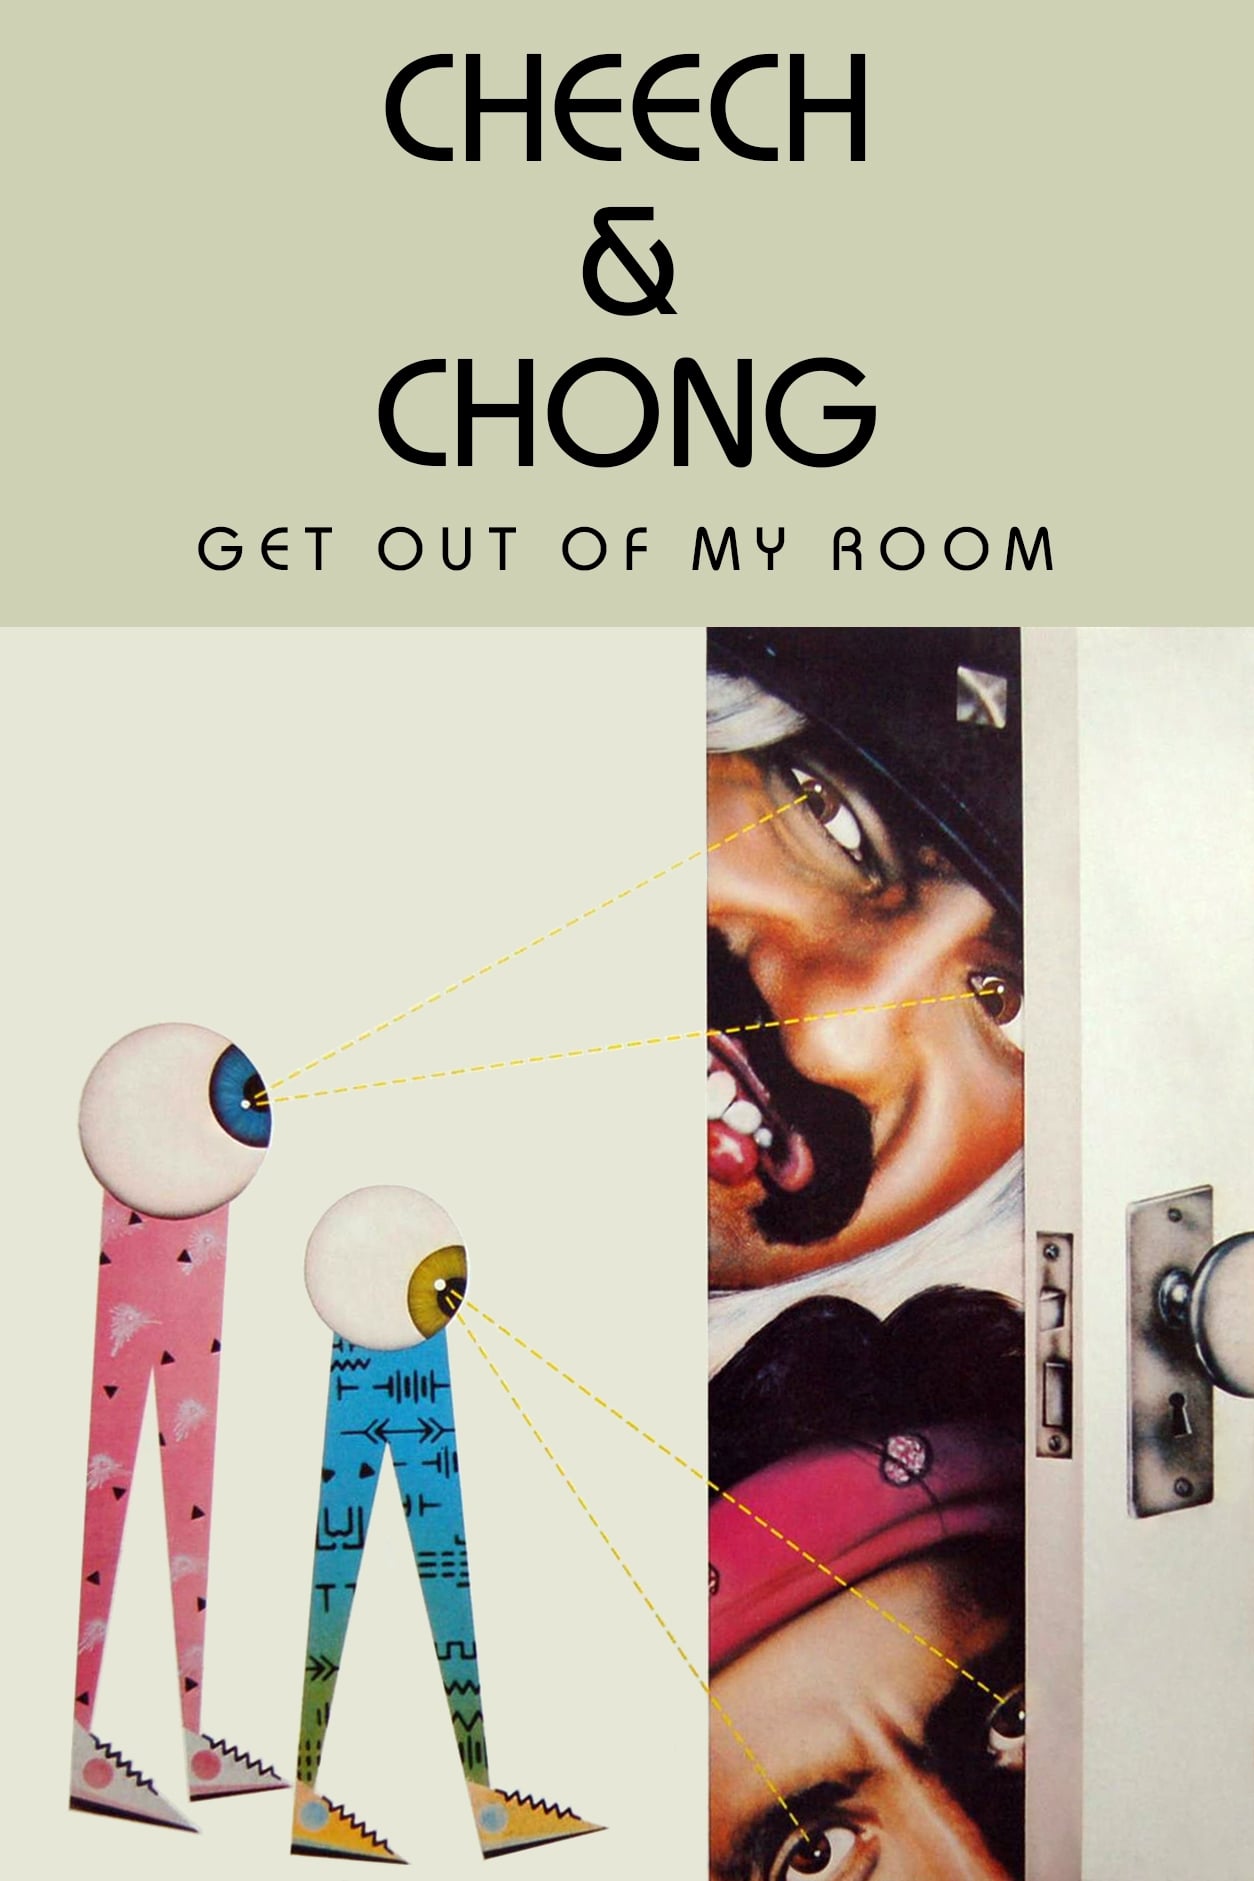 Cheech & Chong Get Out of My Room streaming